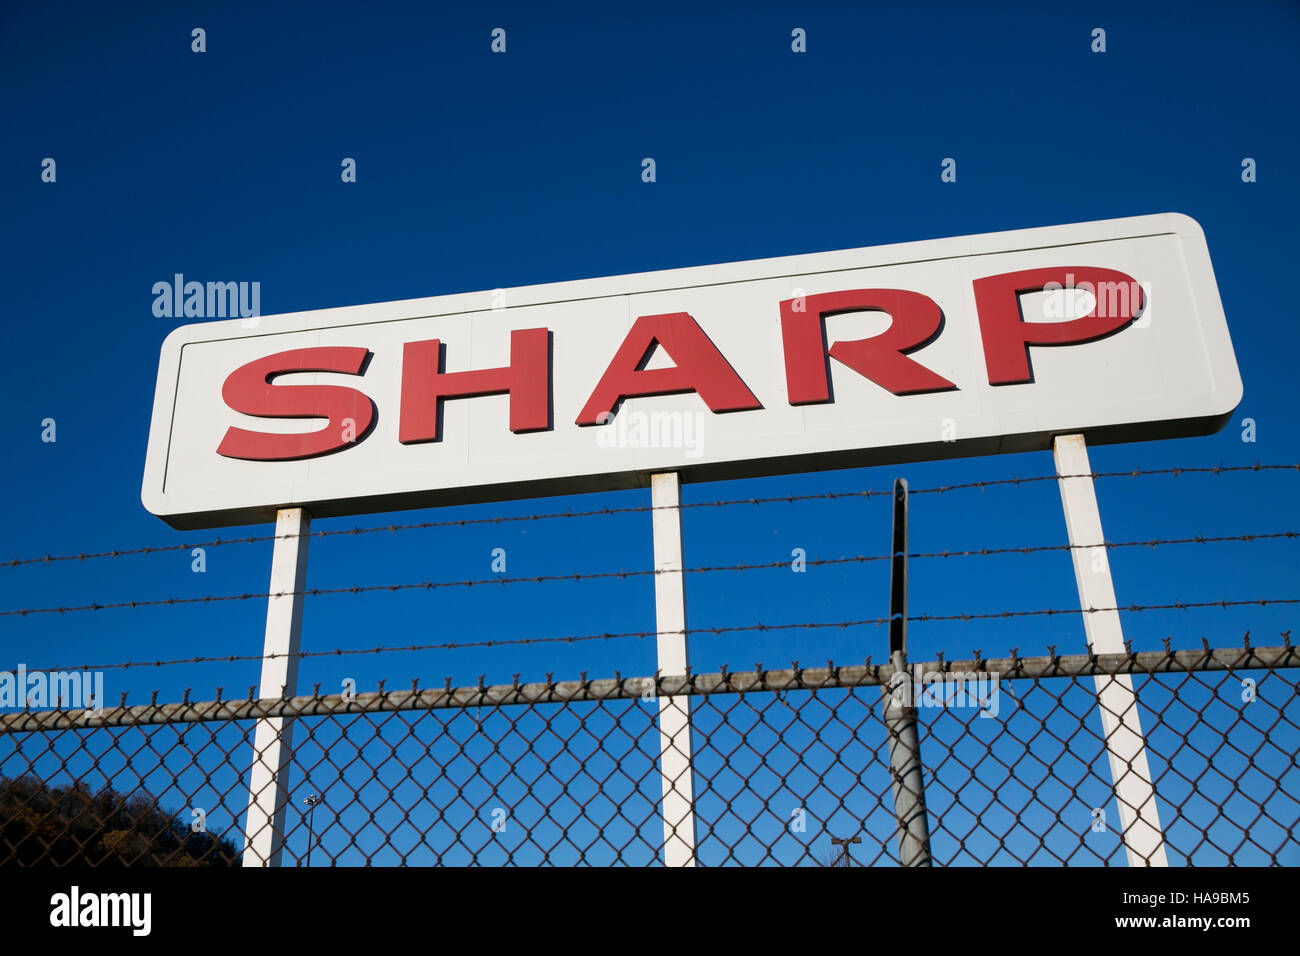 A logo sign outside of a facility occupied by the Sharp Corporation in Mahwah, New Jersey on November 4, 2016. Stock Photo